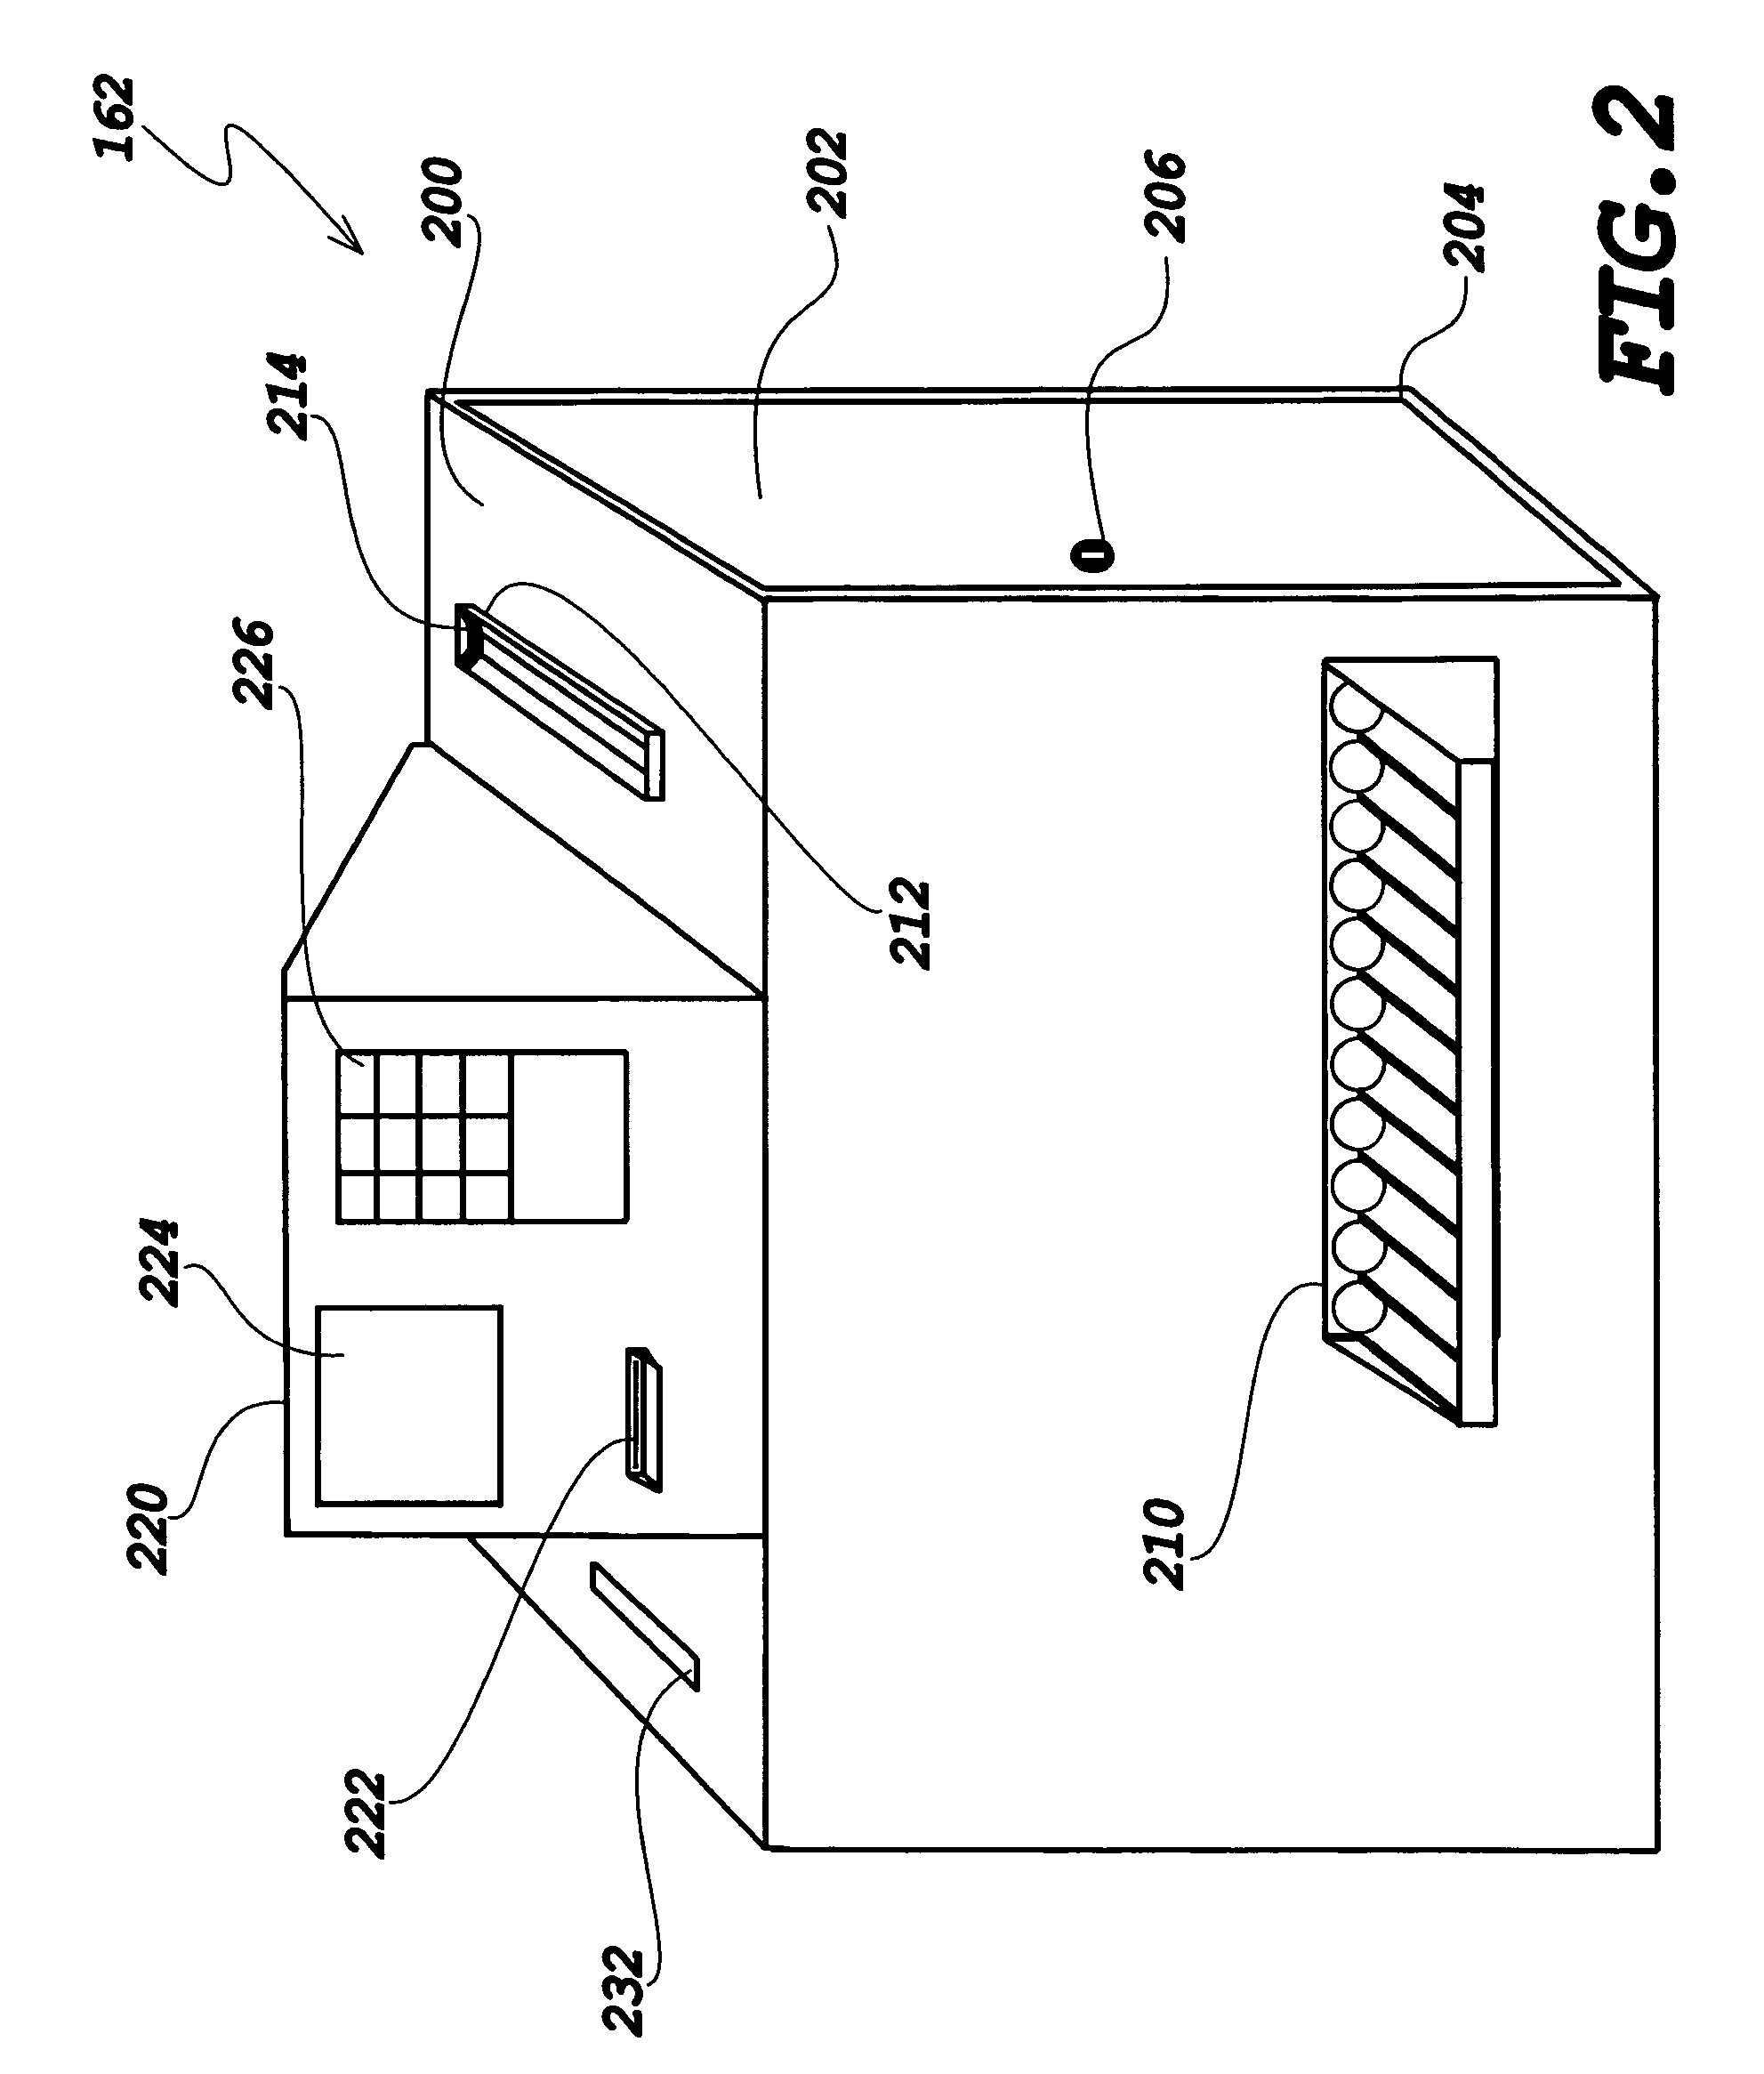 Chip tray loading device and process